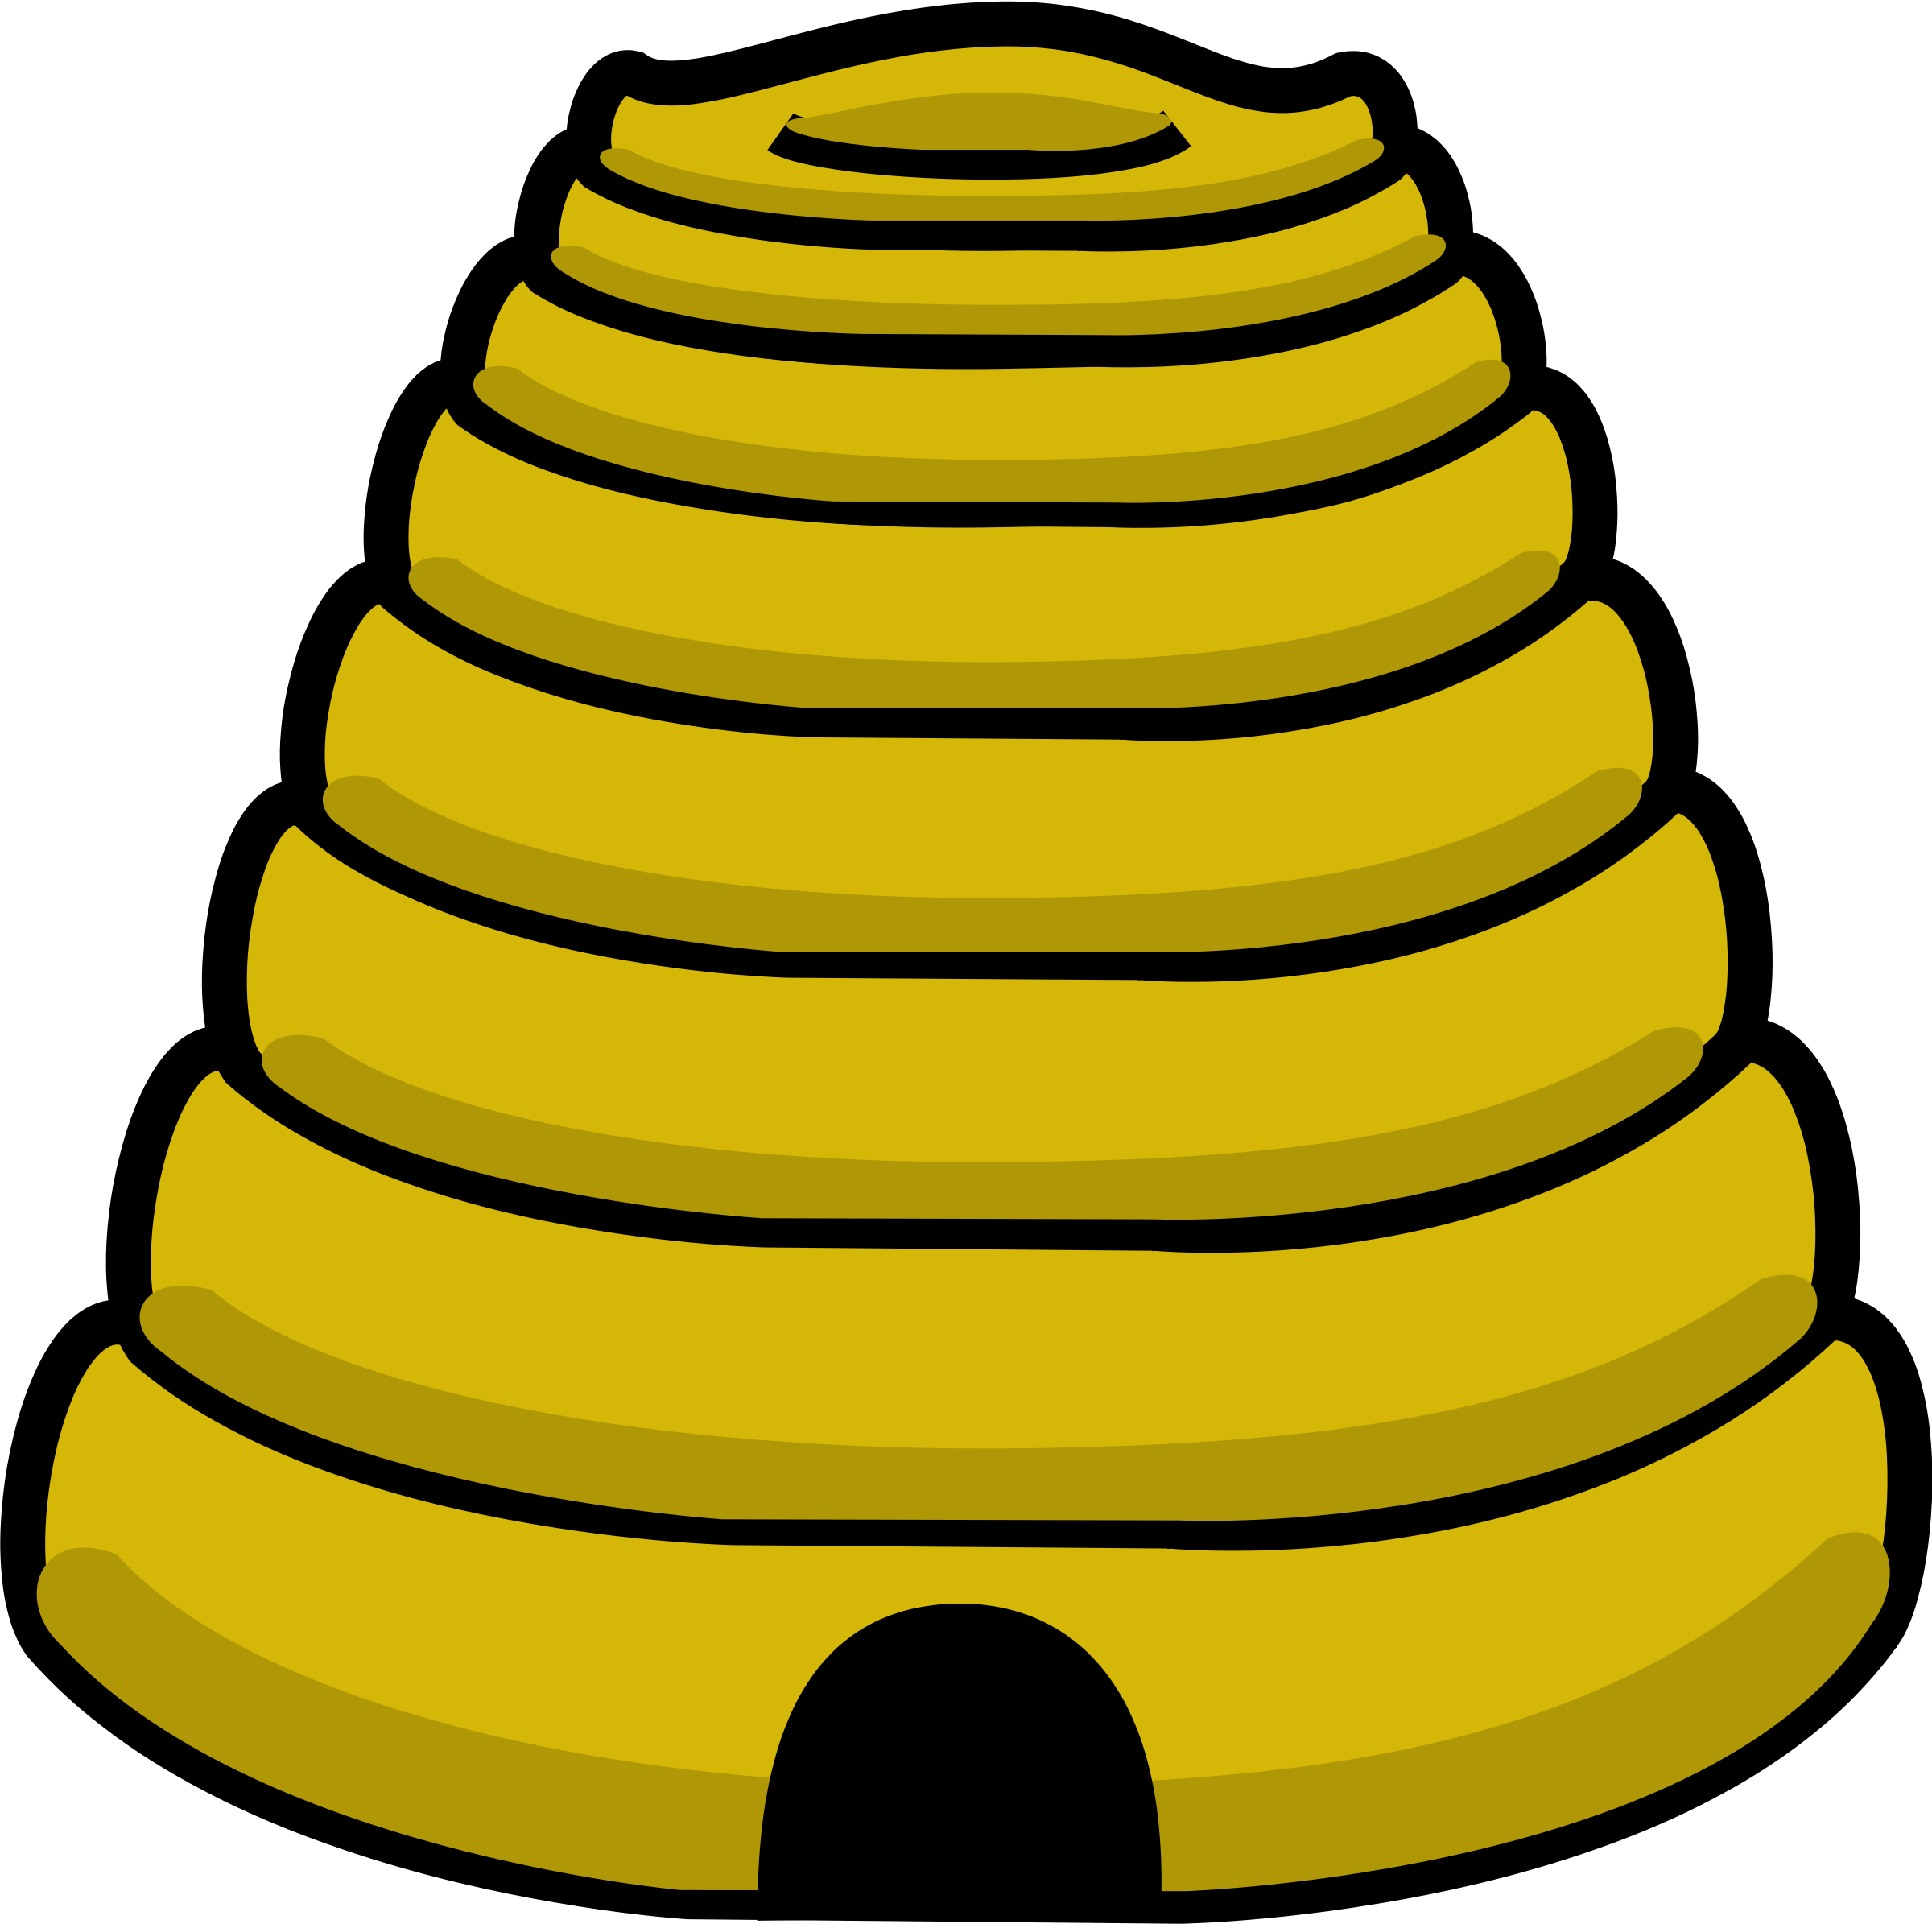 Picture Of Bee Hive - Cartoon Bumble Bee Hive (2400x2390)